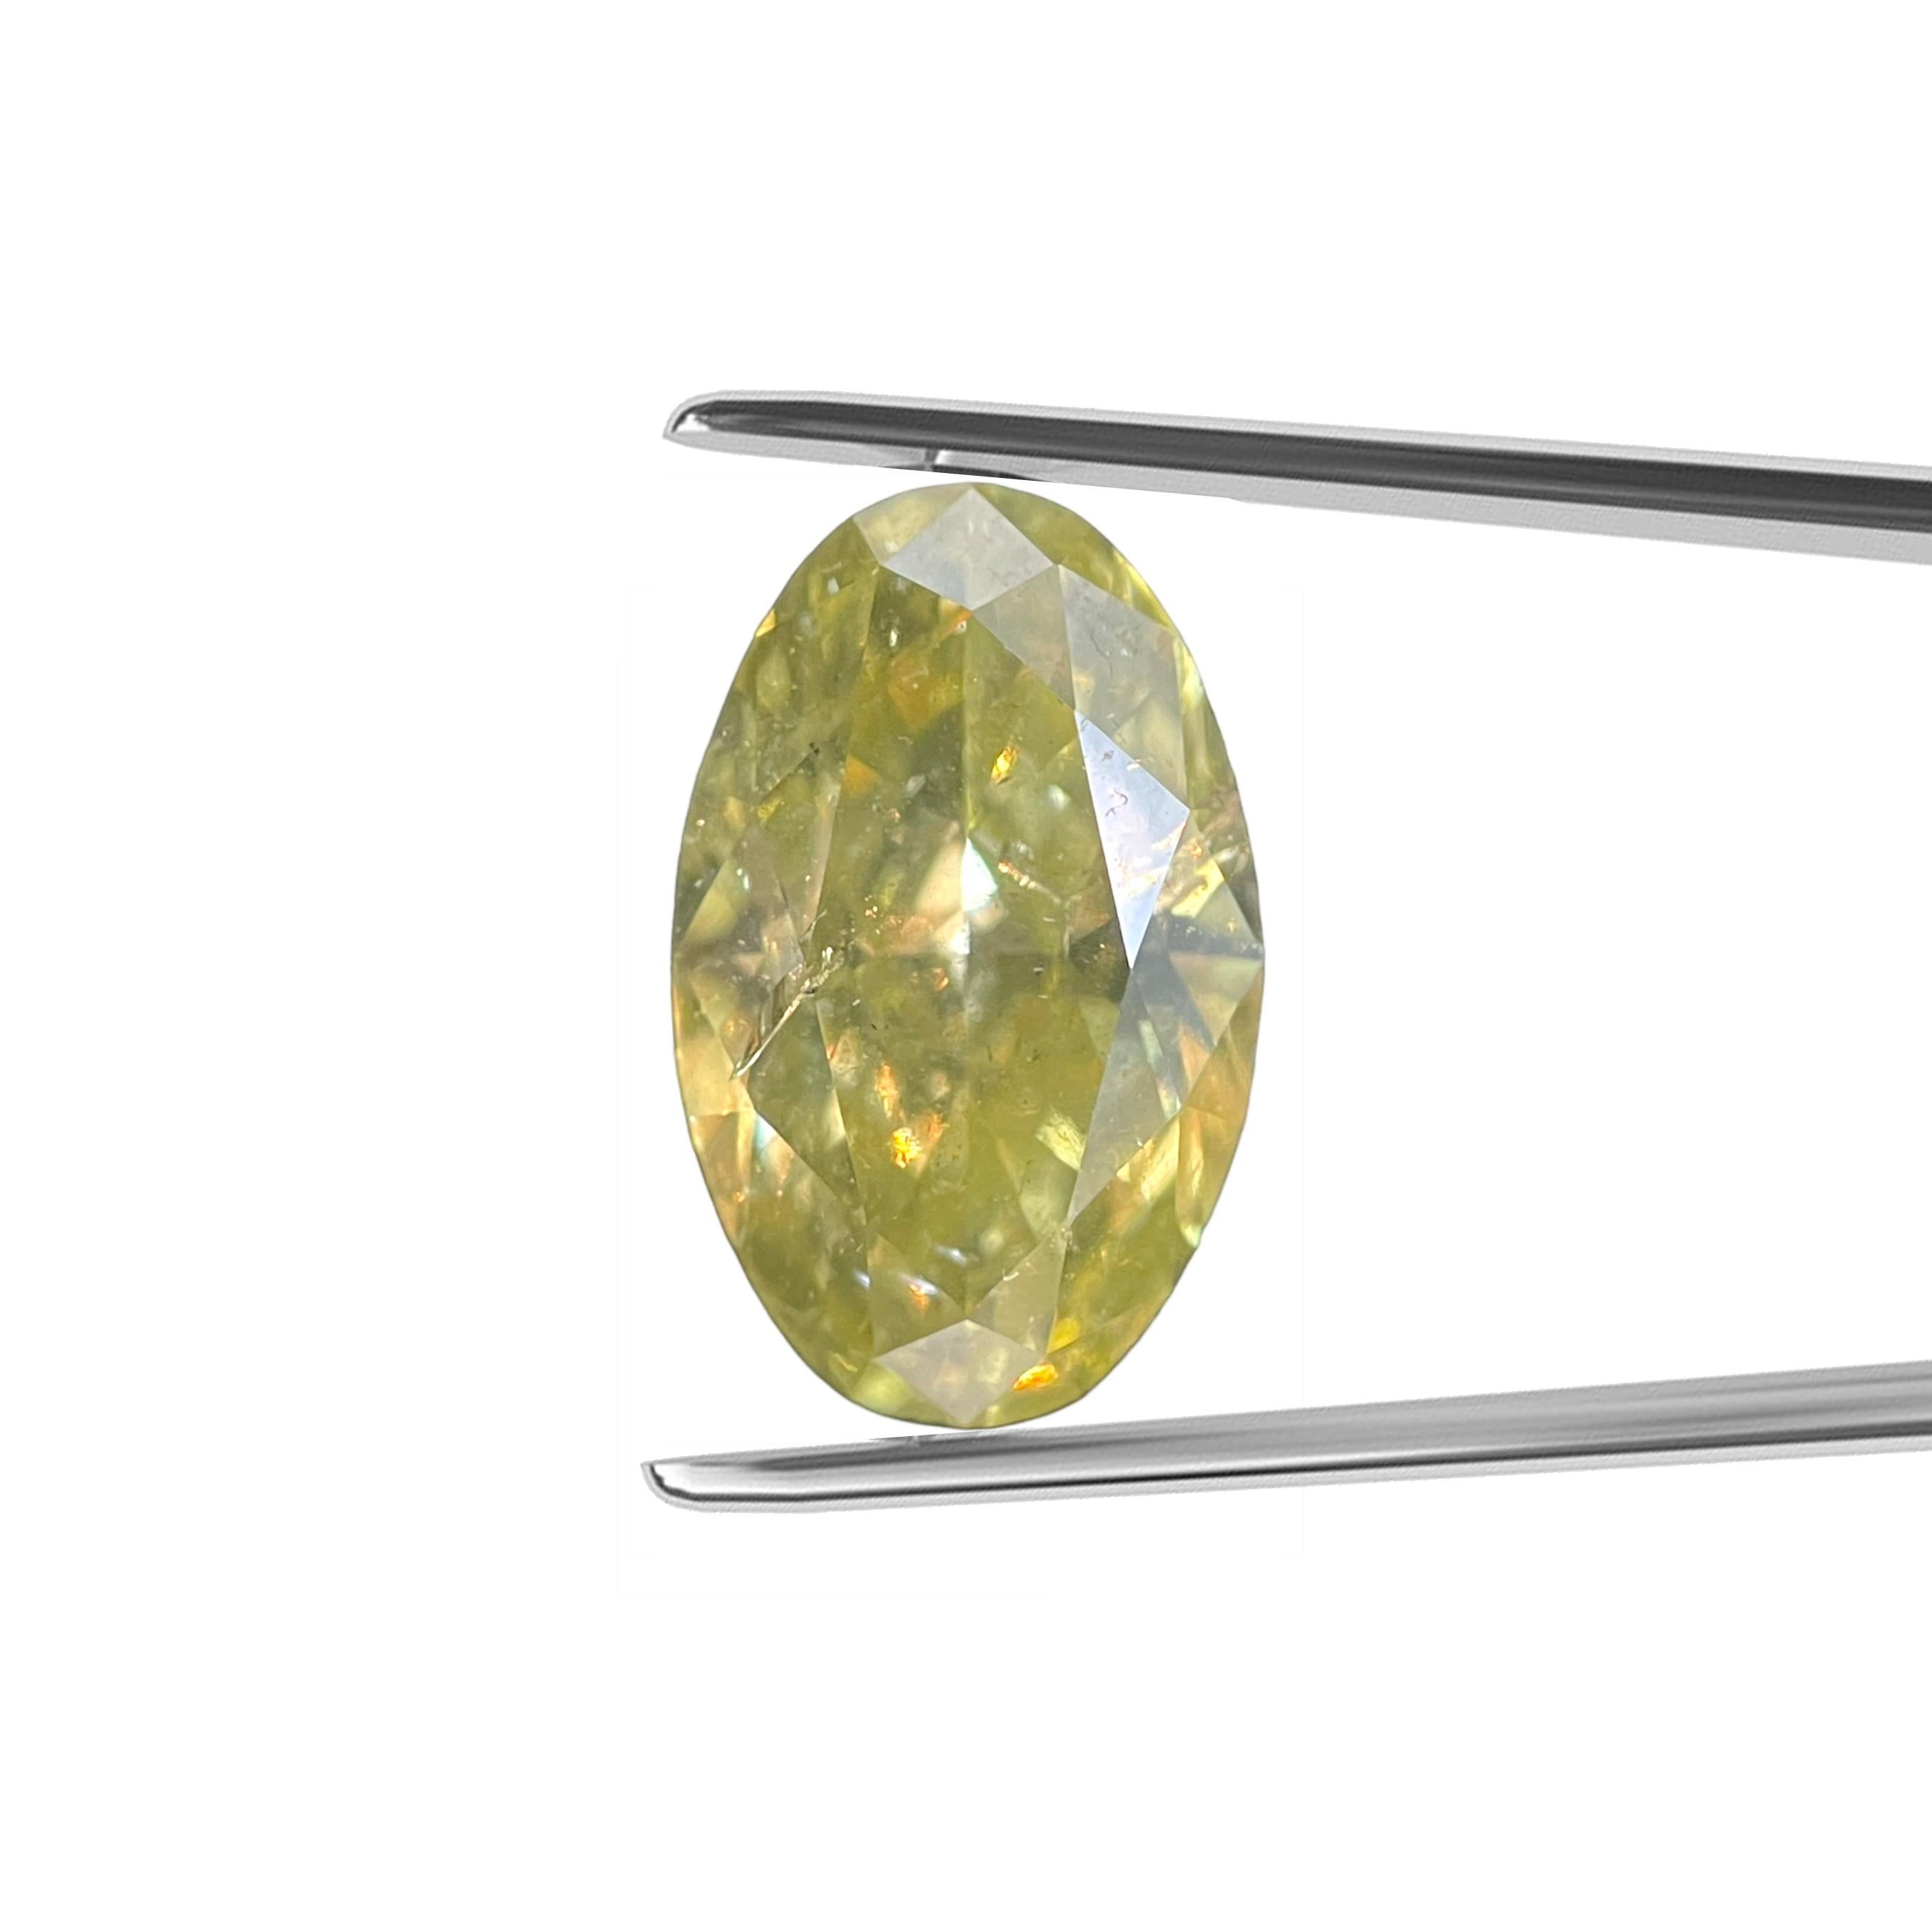 ITEM DESCRIPTION

ID #:	NYC56774
Stone Shape: OVAL BRILLIANT 
Diamond Weight: 1.69ct
Clarity: I1
Color: Fancy Intense Yellow
Cut:	Excellent
Measurements: 9.87 x 6.27 x 3.84 mm
Depth %:	61.2%
Table %:	54%
Symmetry: Very Good
Polish: Very